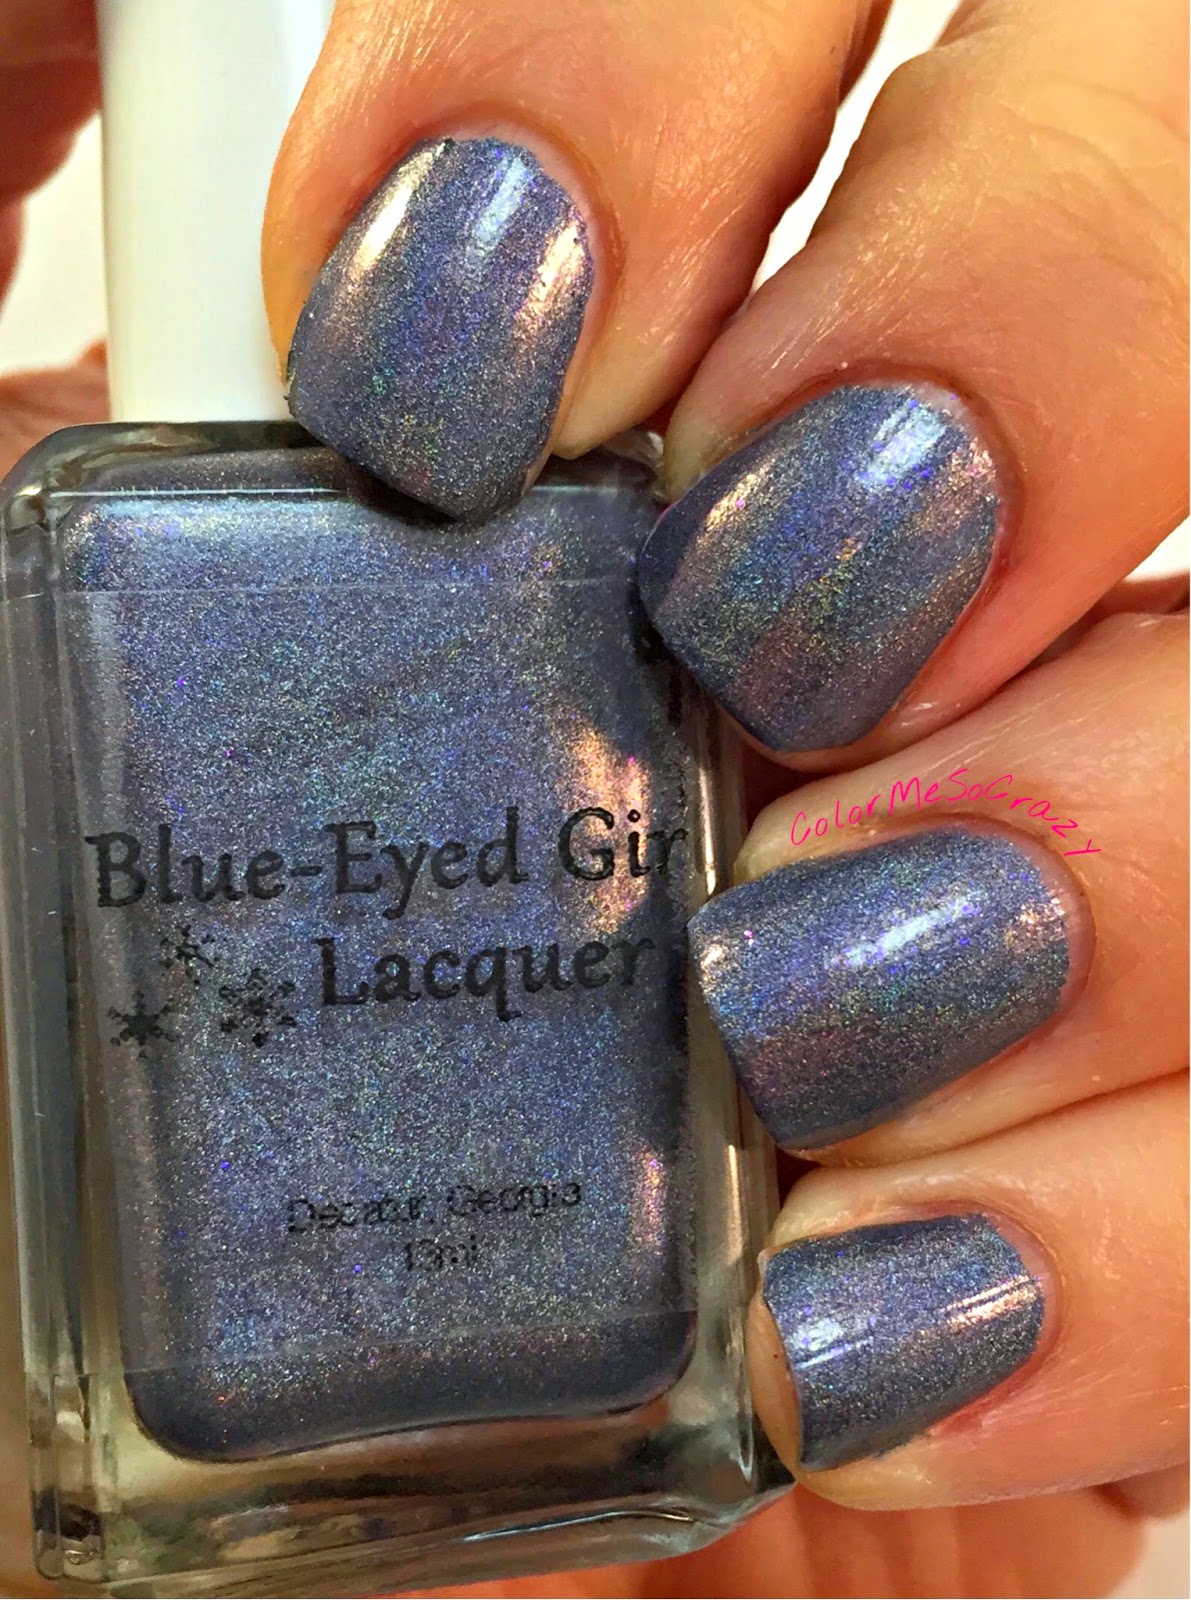 begl, blue eyed girl lacquer, nail polish, purple polish, spark in the dark, purple holographic, holographic indie polish, hypothermia, holo polish